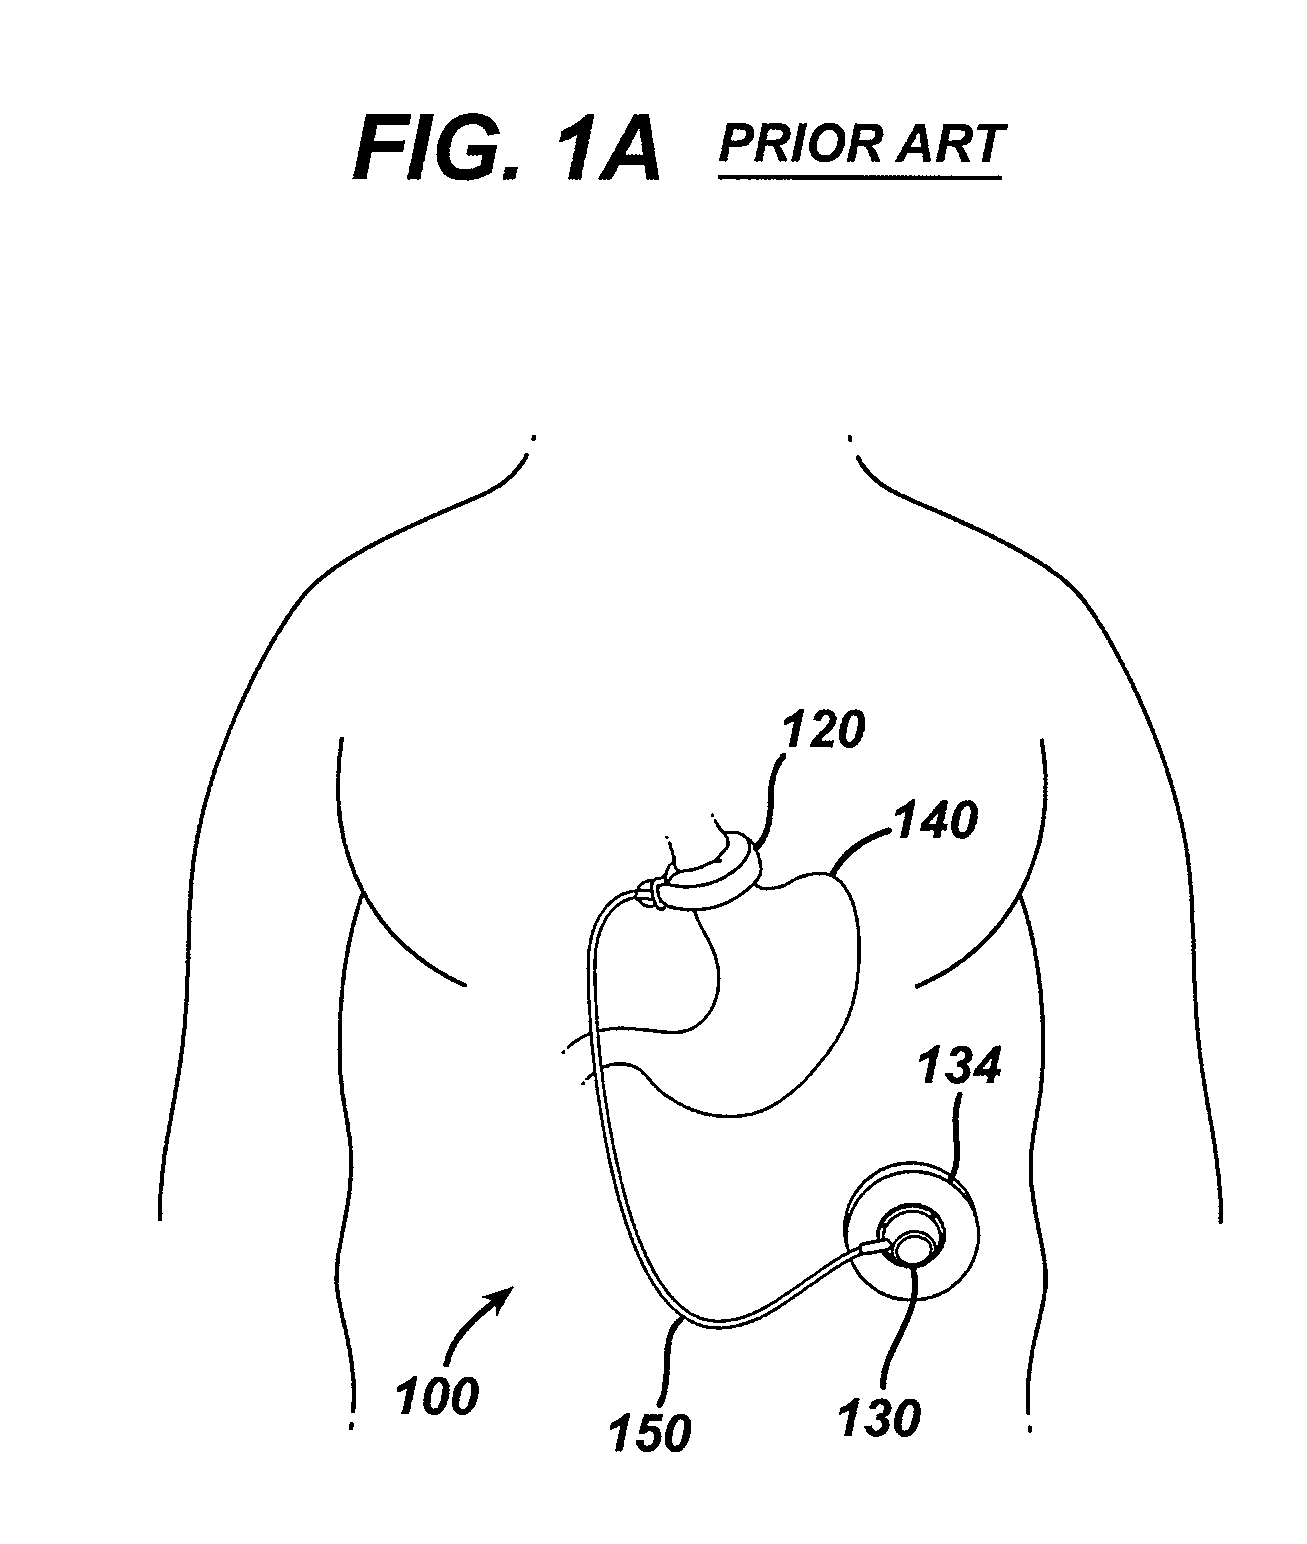 Methods for implanting a gastric restriction device